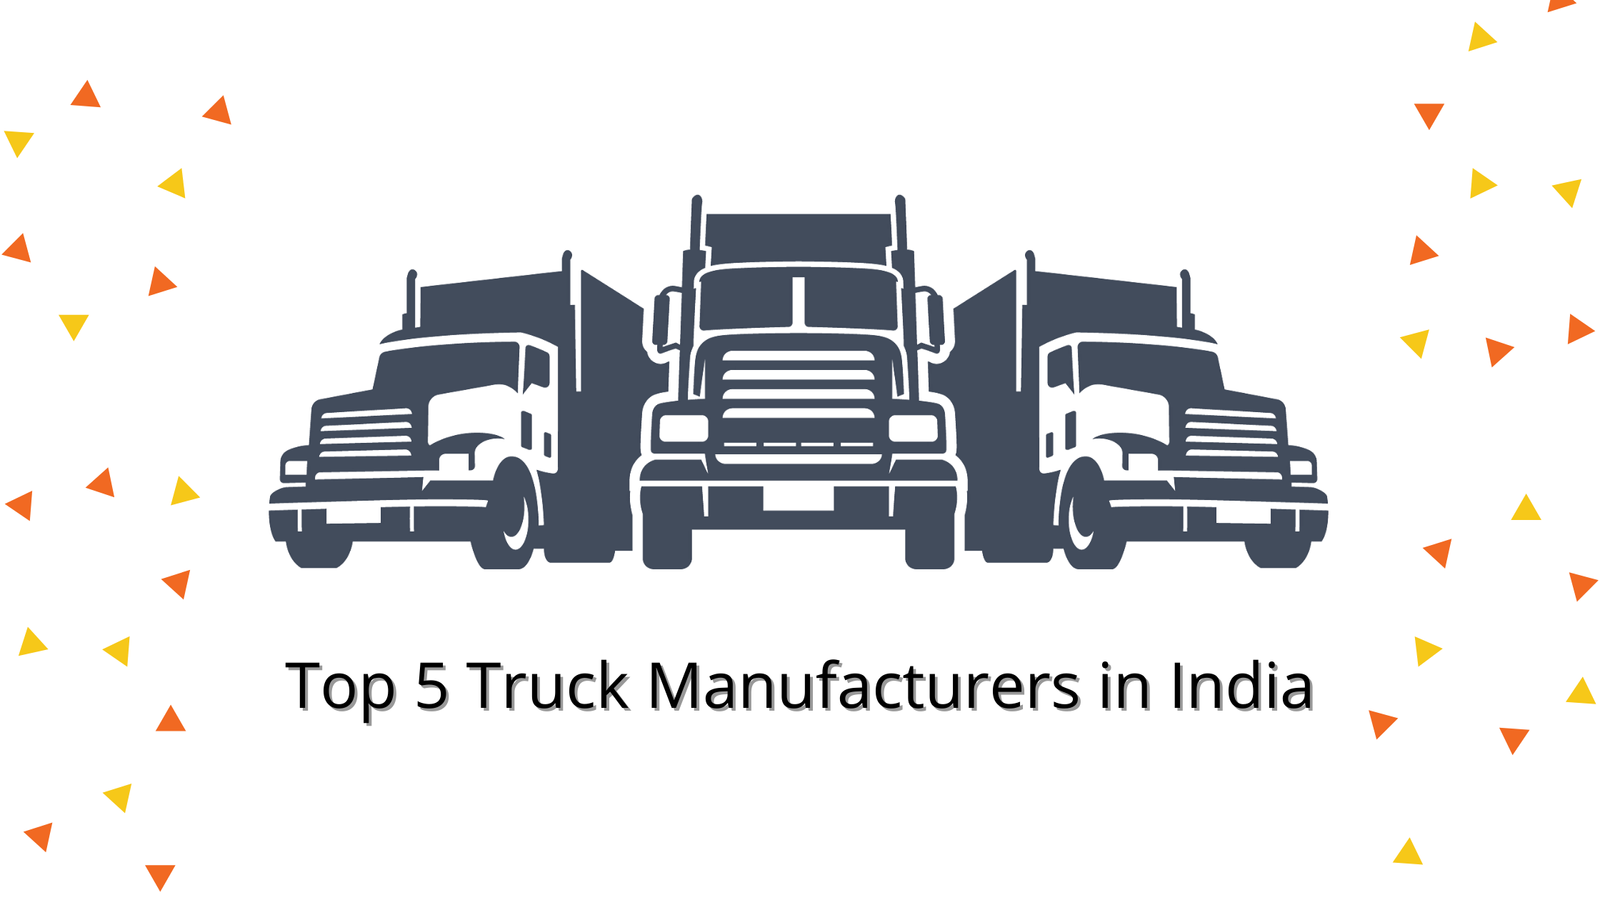 Top 5 Truck Manufacturers in India